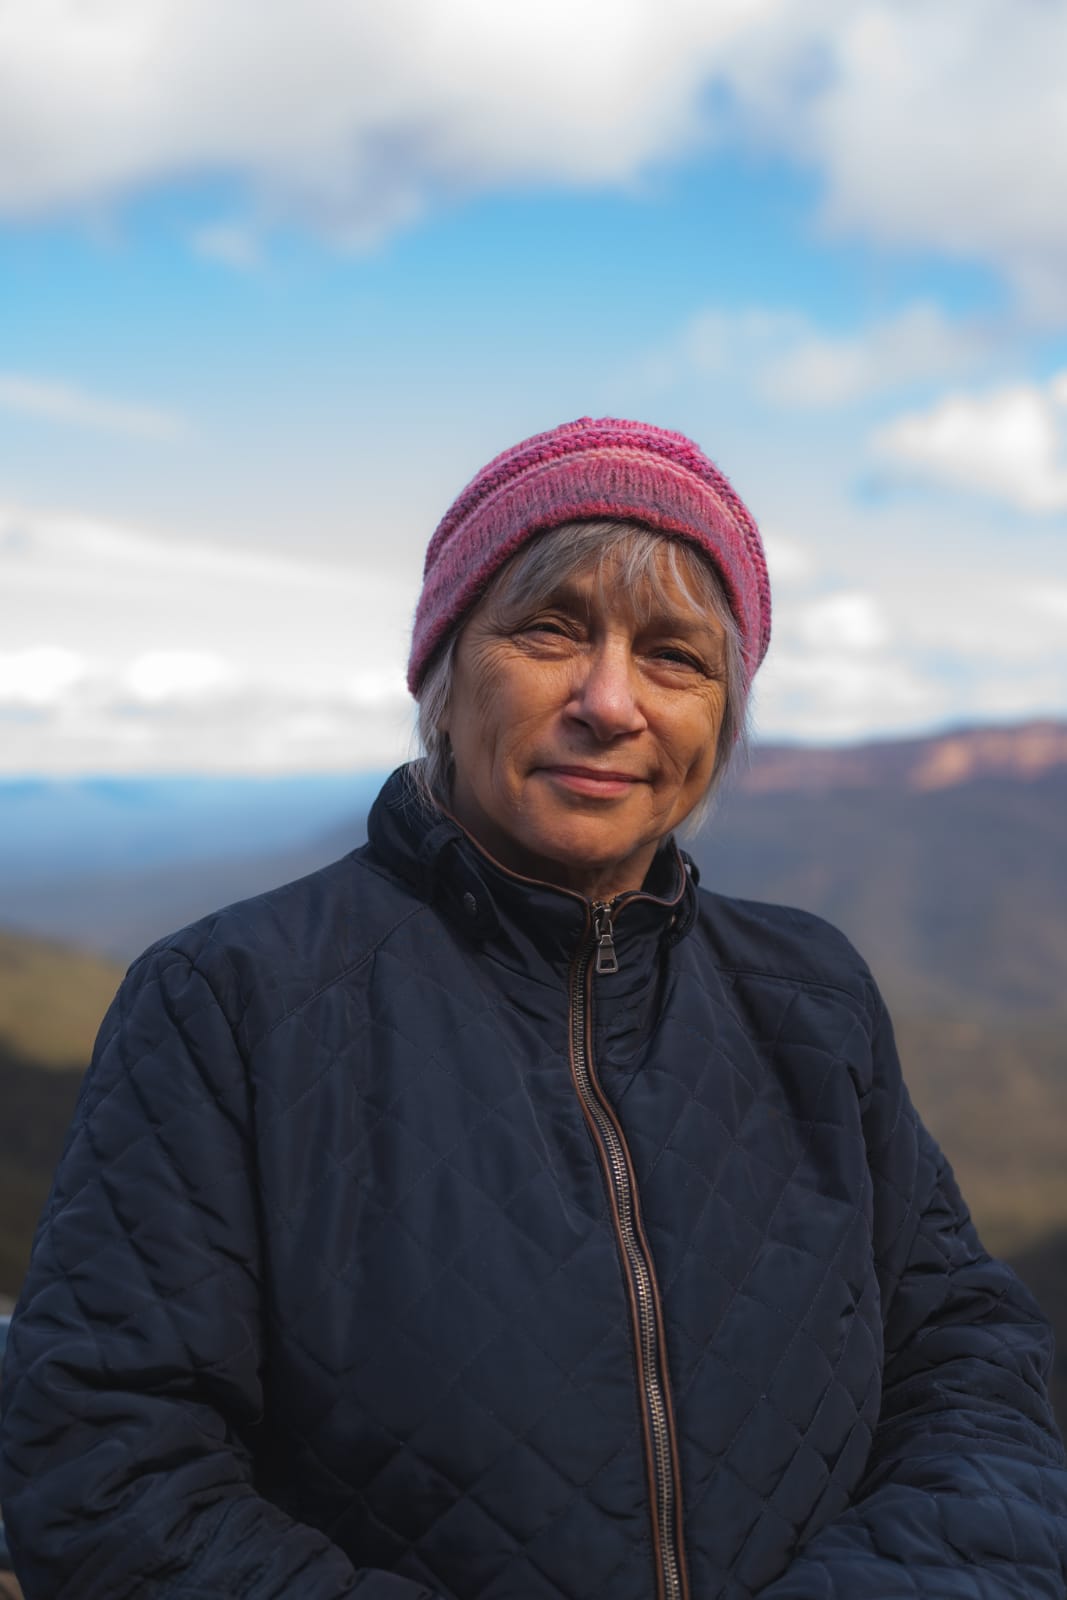 Maria van Neerven stands in a dark blue jacket and pink beanie at a mountain lookout